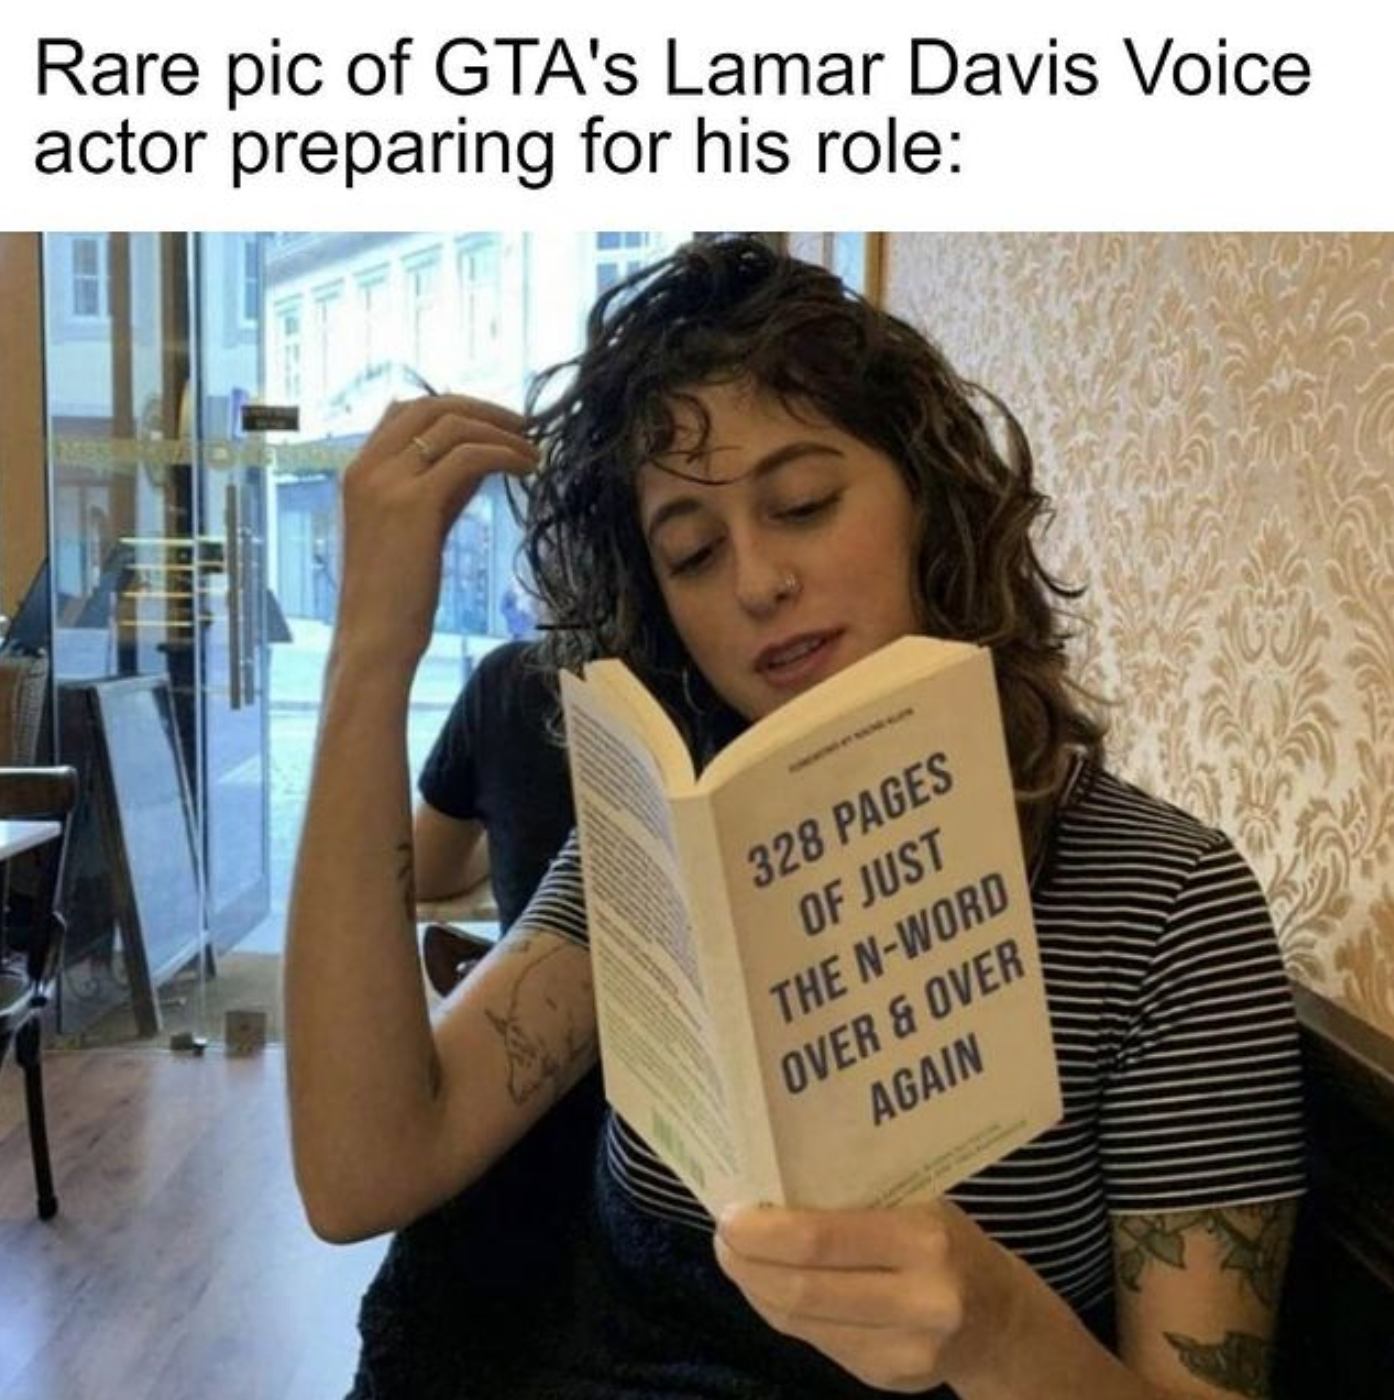 funny gaming memes - photo caption - Rare pic of Gta's Lamar Davis Voice actor preparing for his role 328 Pages Of Just The NWord Over & Over Again